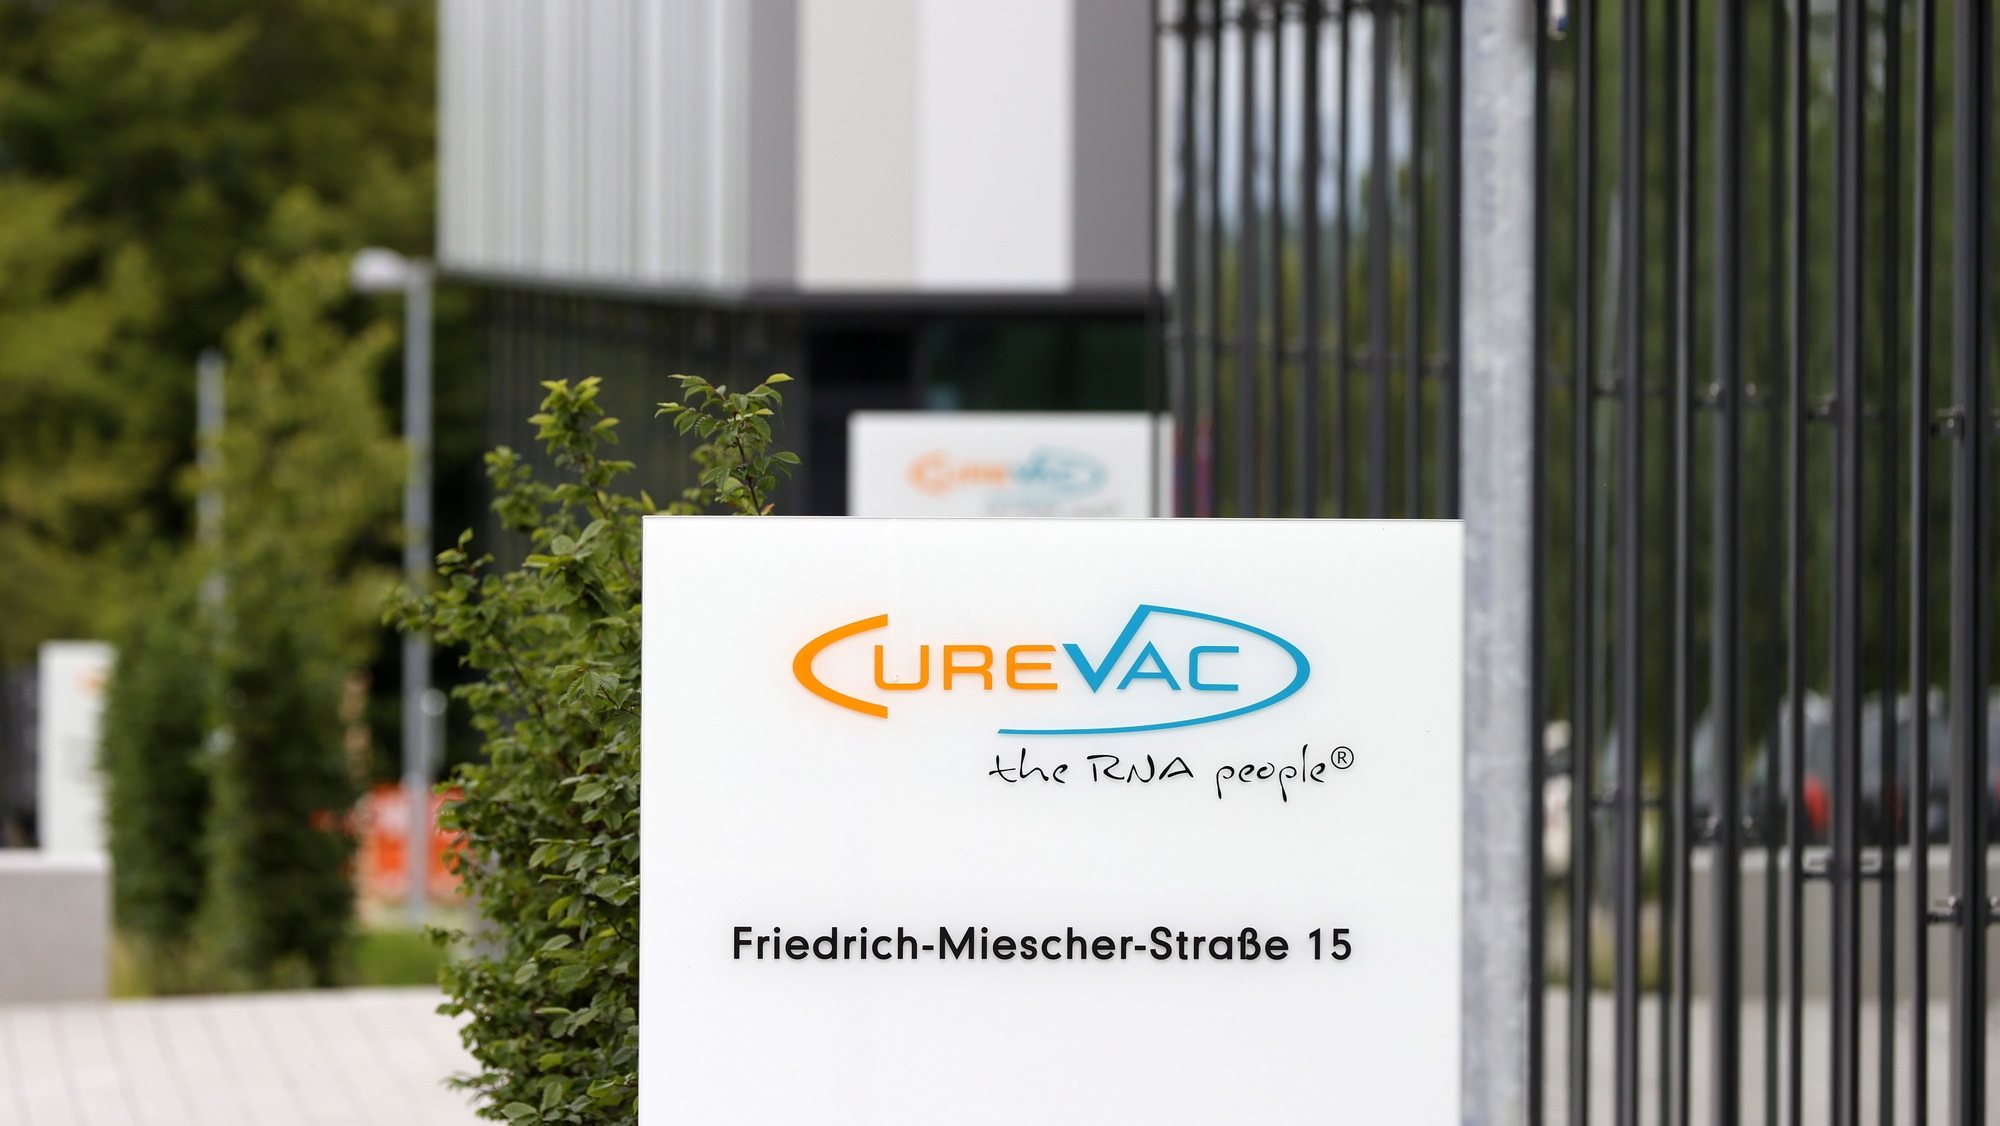 epa08495576 A view of a logo of biopharmaceutical company CureVac at the main building in Tuebingen, Germany, 19 June 2020. According to media reports, German biotech firm CureVac will launch clinical trials of a coronavirus vaccine that is approved by the Paul Ehrlich Institute.  EPA/RONALD WITTEK